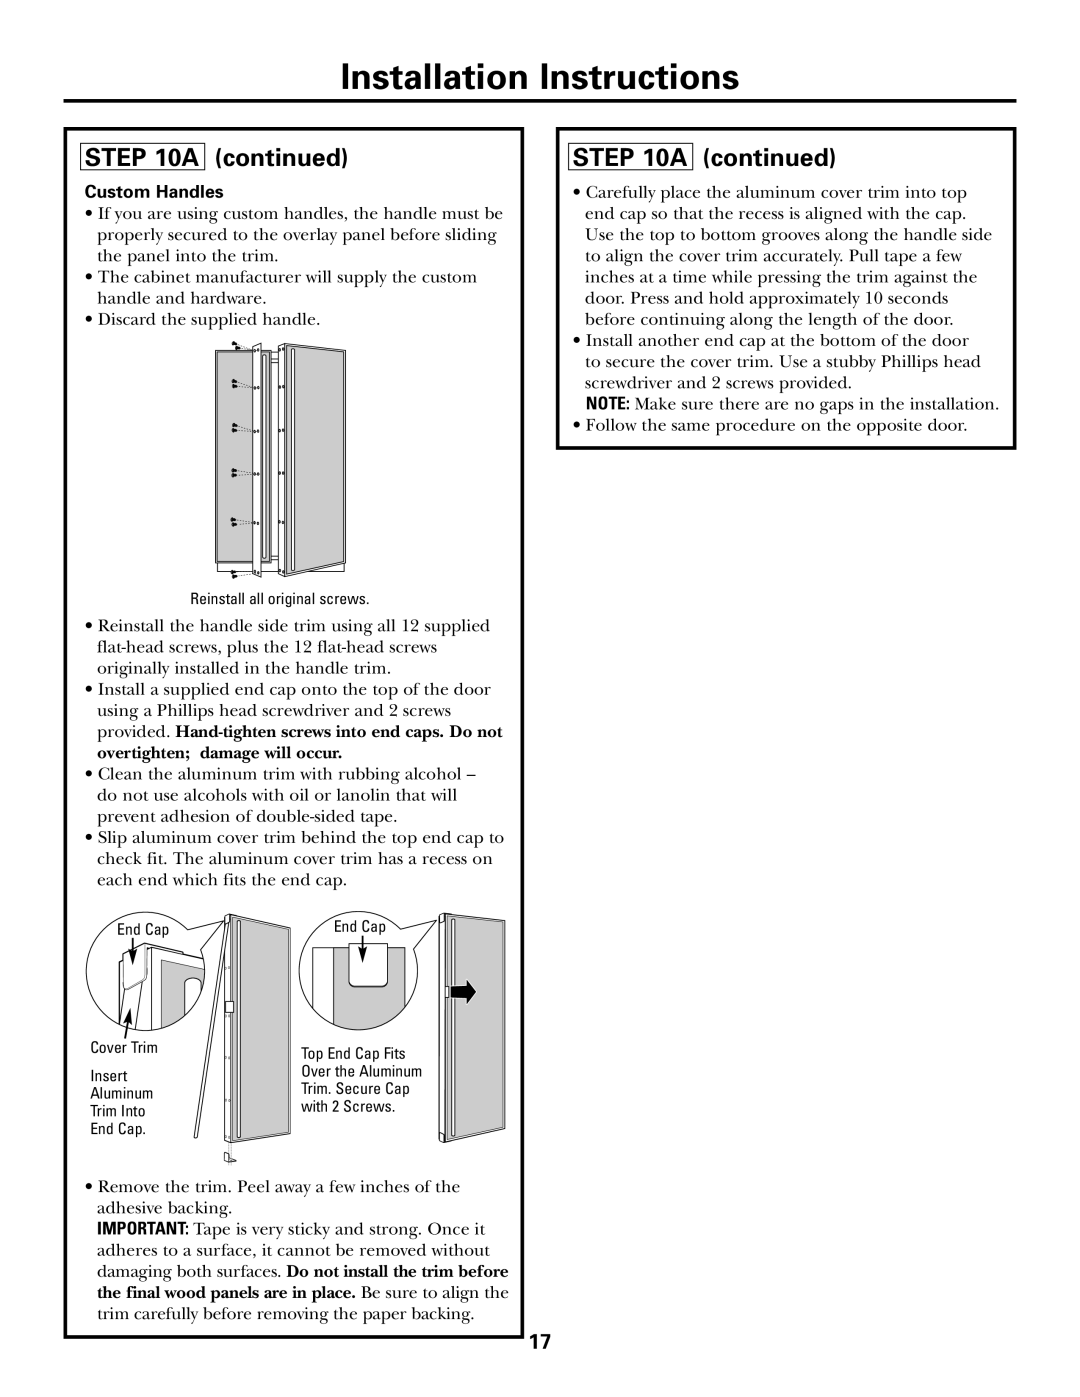 GE Monogram Side by Side Refrigerators installation instructions A continued, Custom Handles, Installation Instructions 